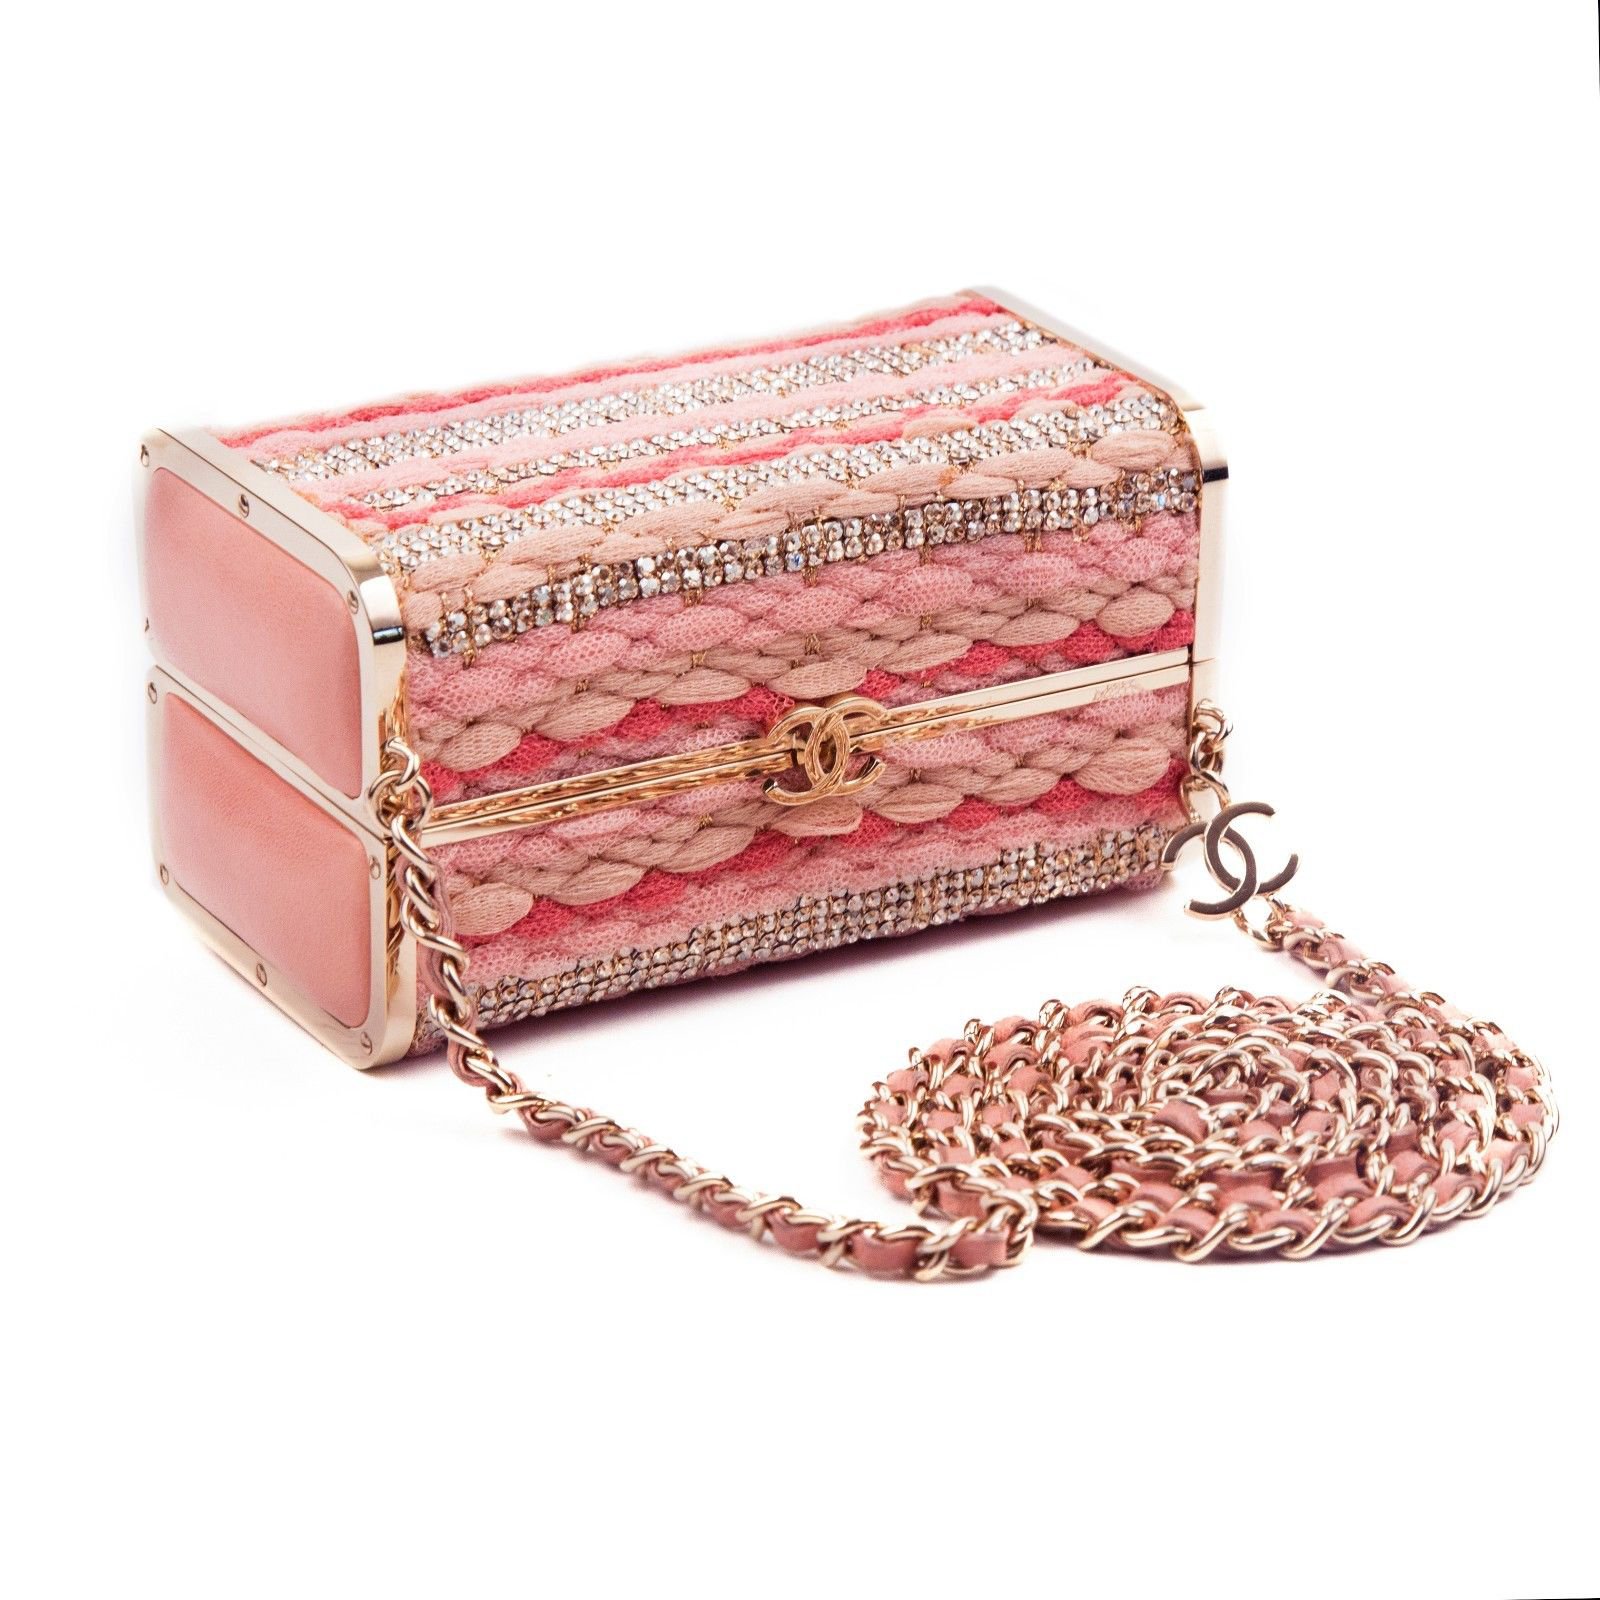 Box Minaudiere Shoulder Bag GHW Lambskin, Tulle, & Crystal Limited Edition